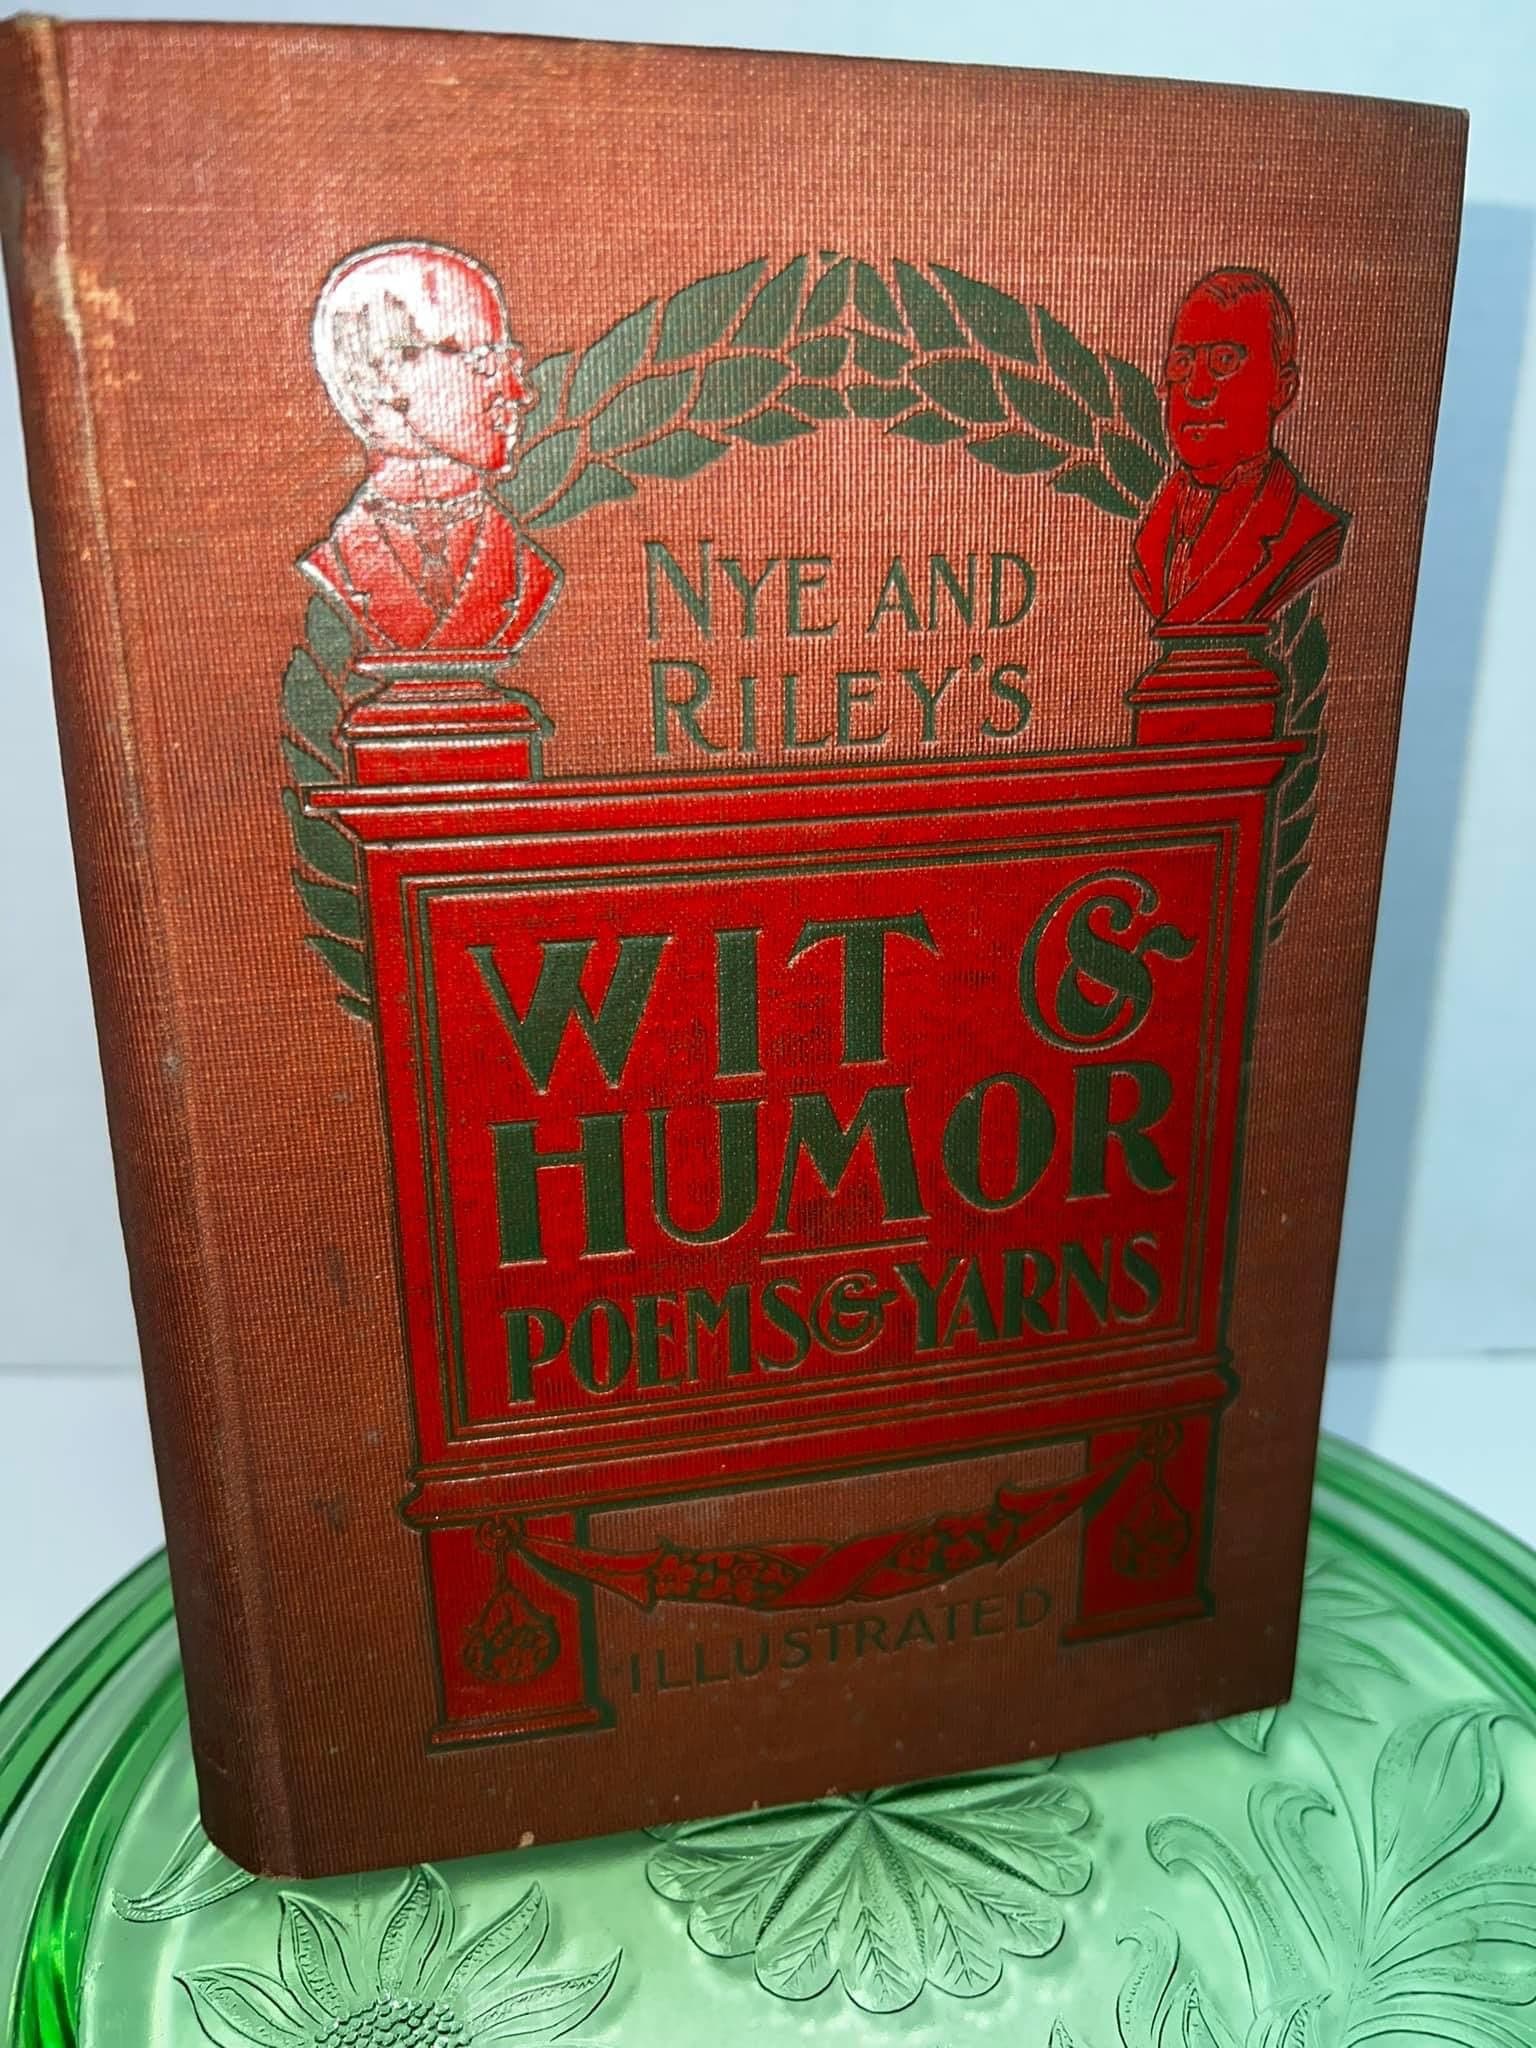 Antique Nye and riley’s Wit & humor poems and yarns C 1900